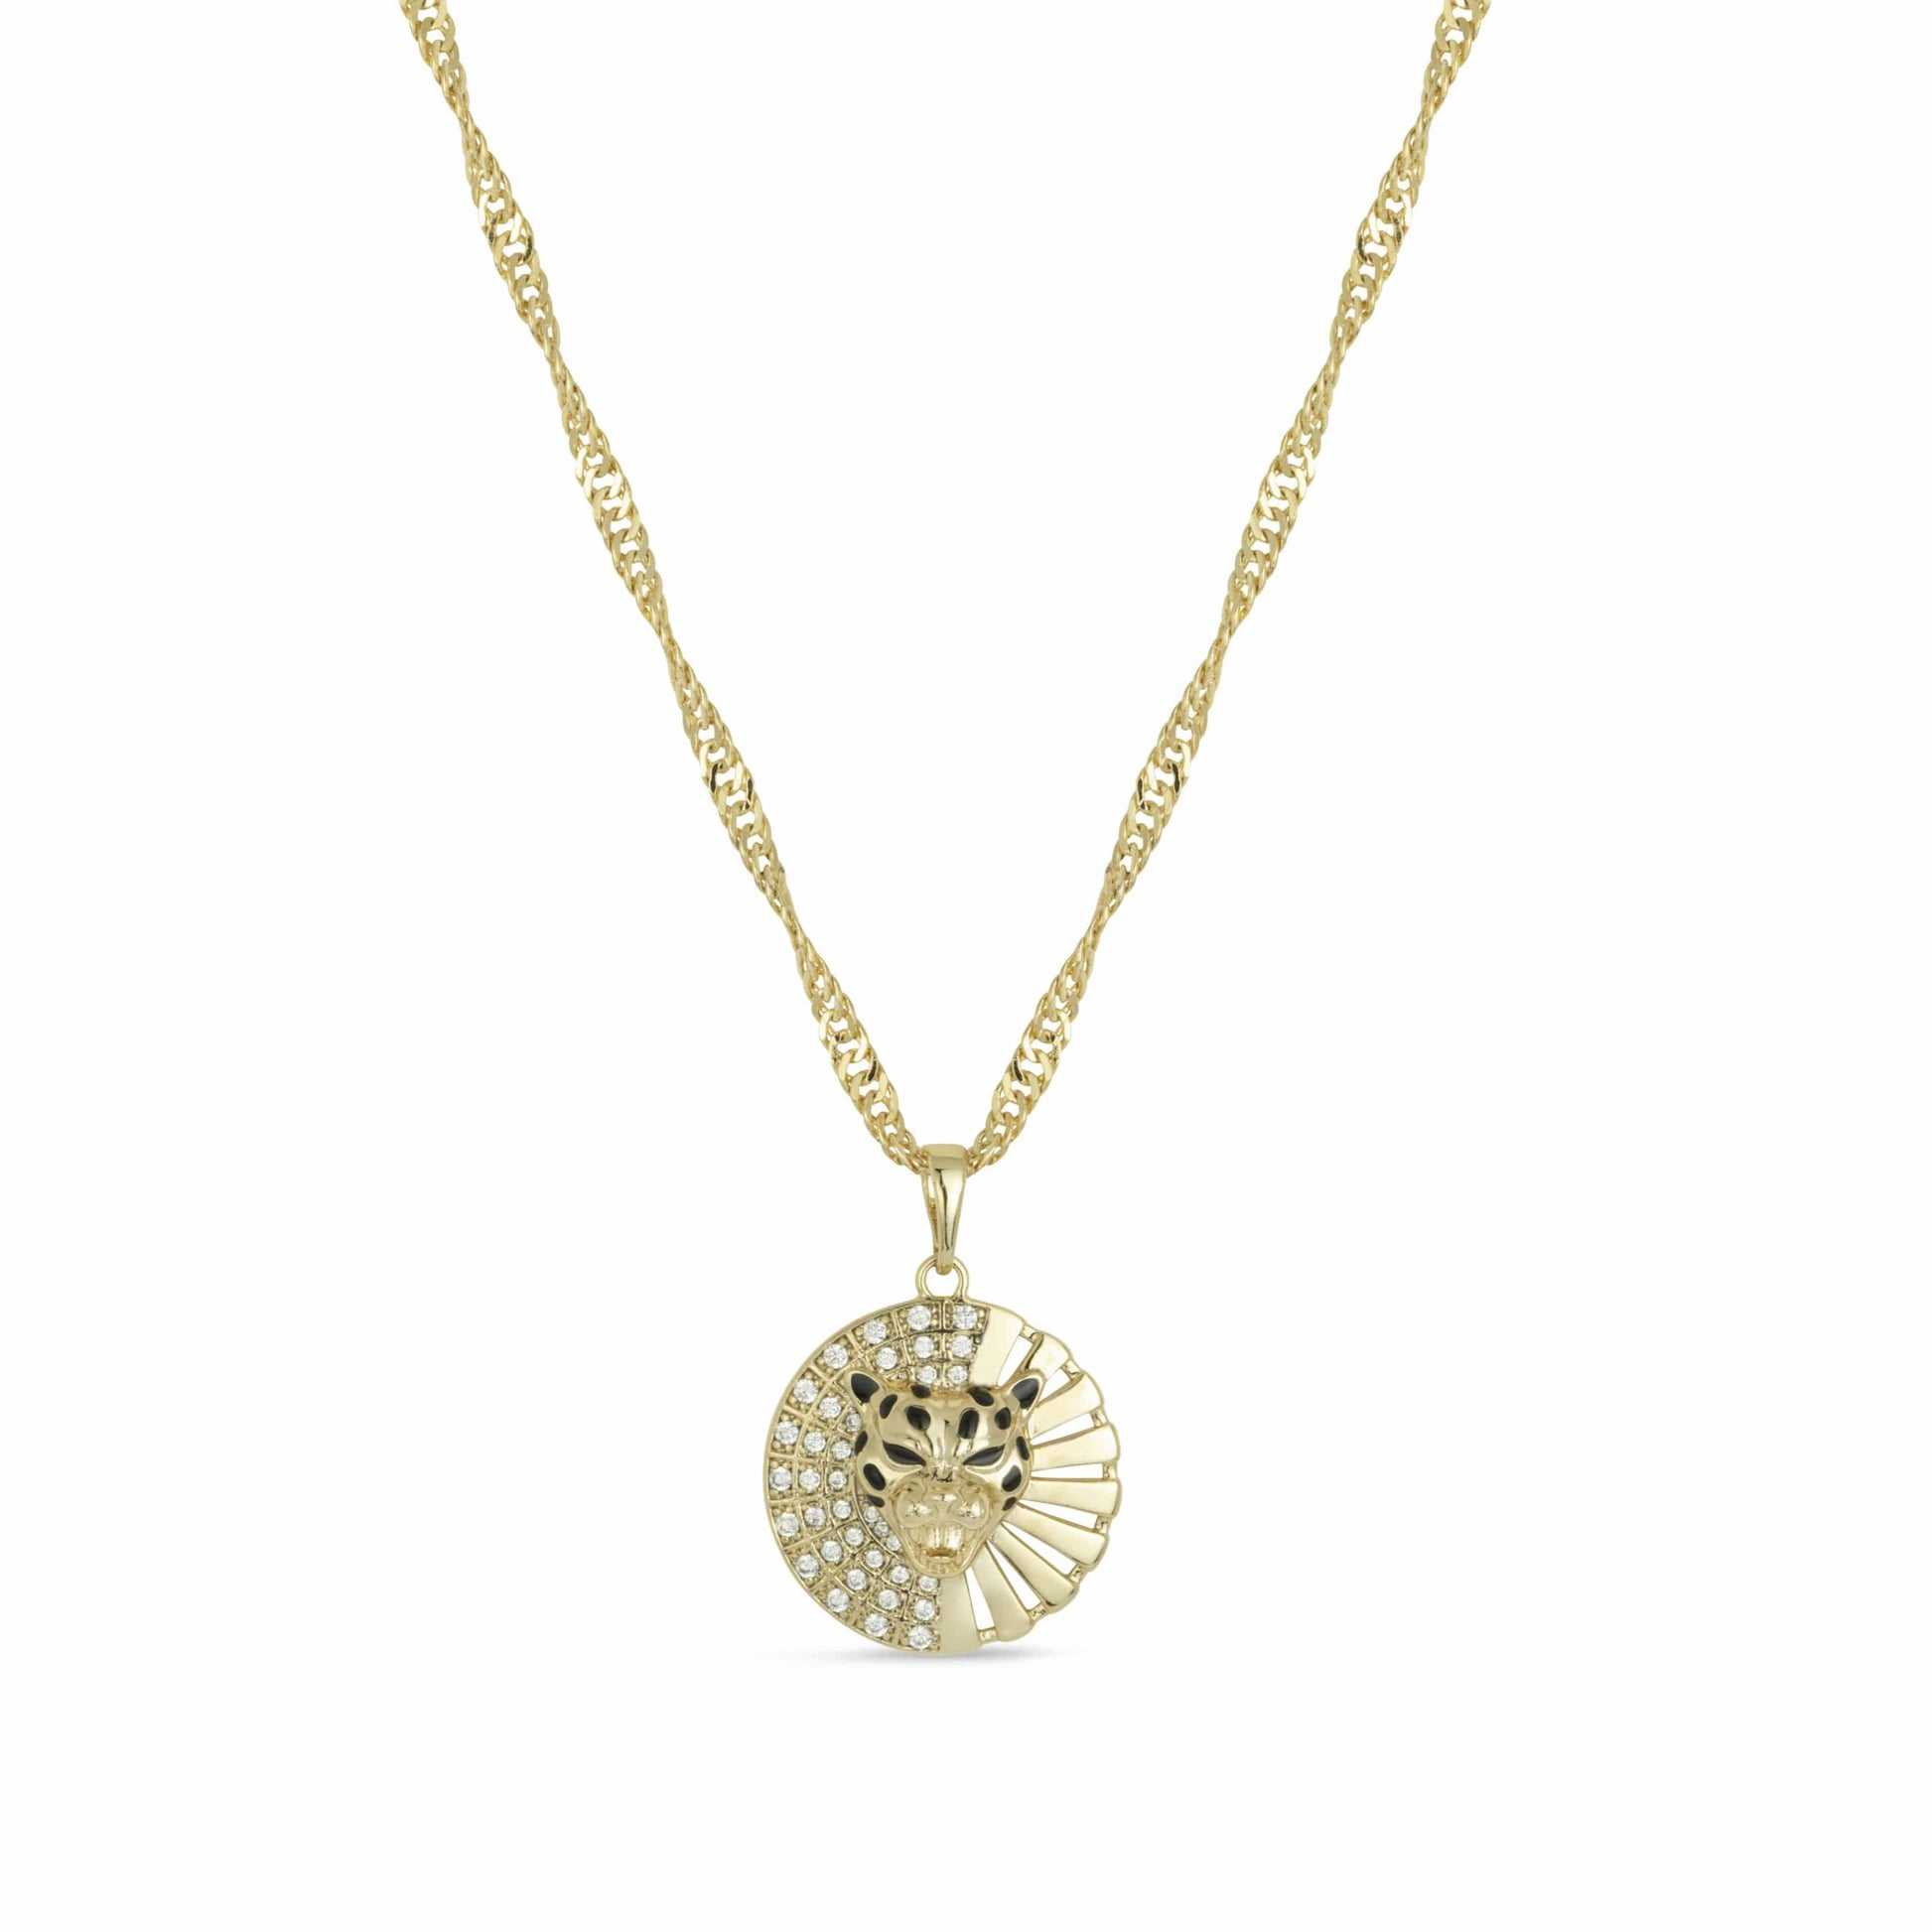 Gold Cheetah Pendant with Cubic Zirconia and Enamel Details - Love & Lilly Jewellery